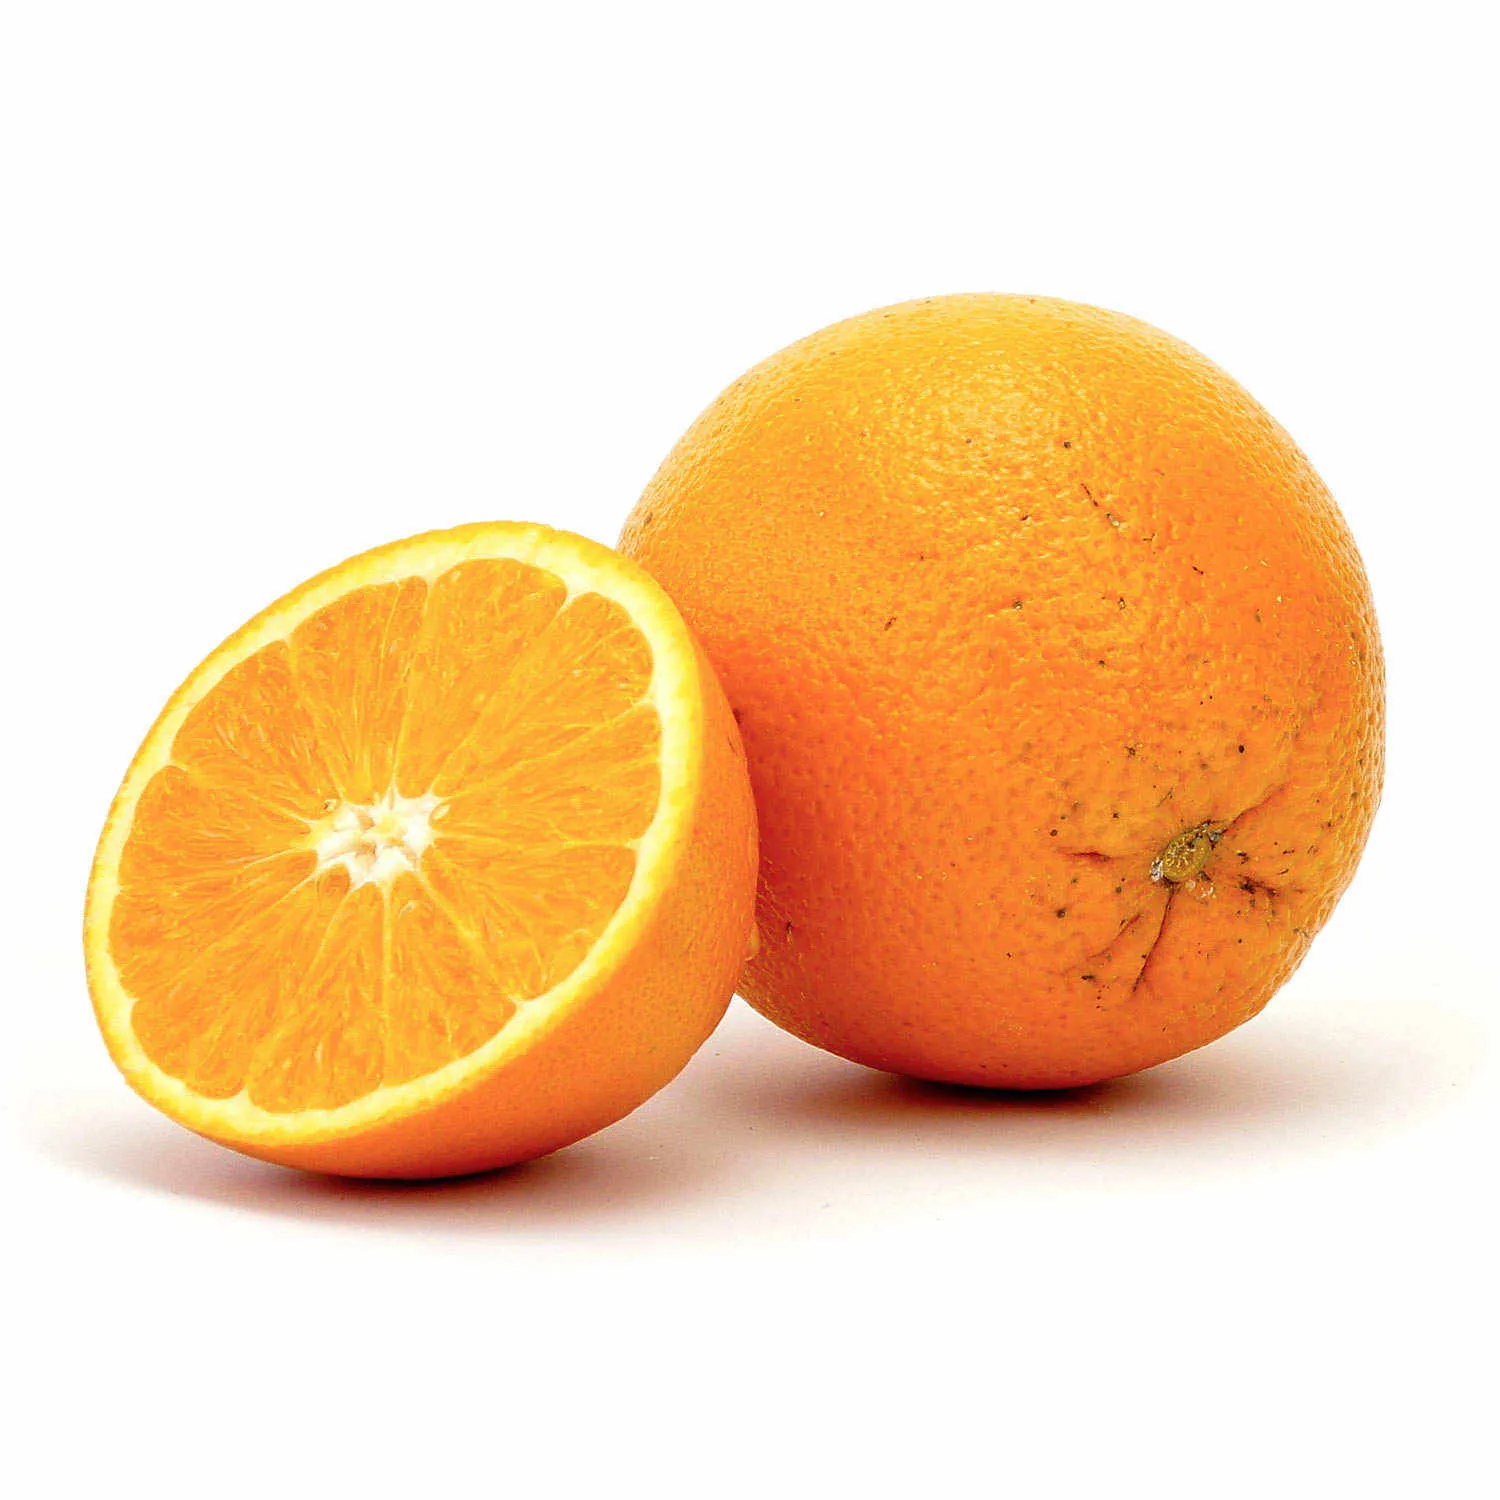 Introducing quality navel orange + the best purchase price